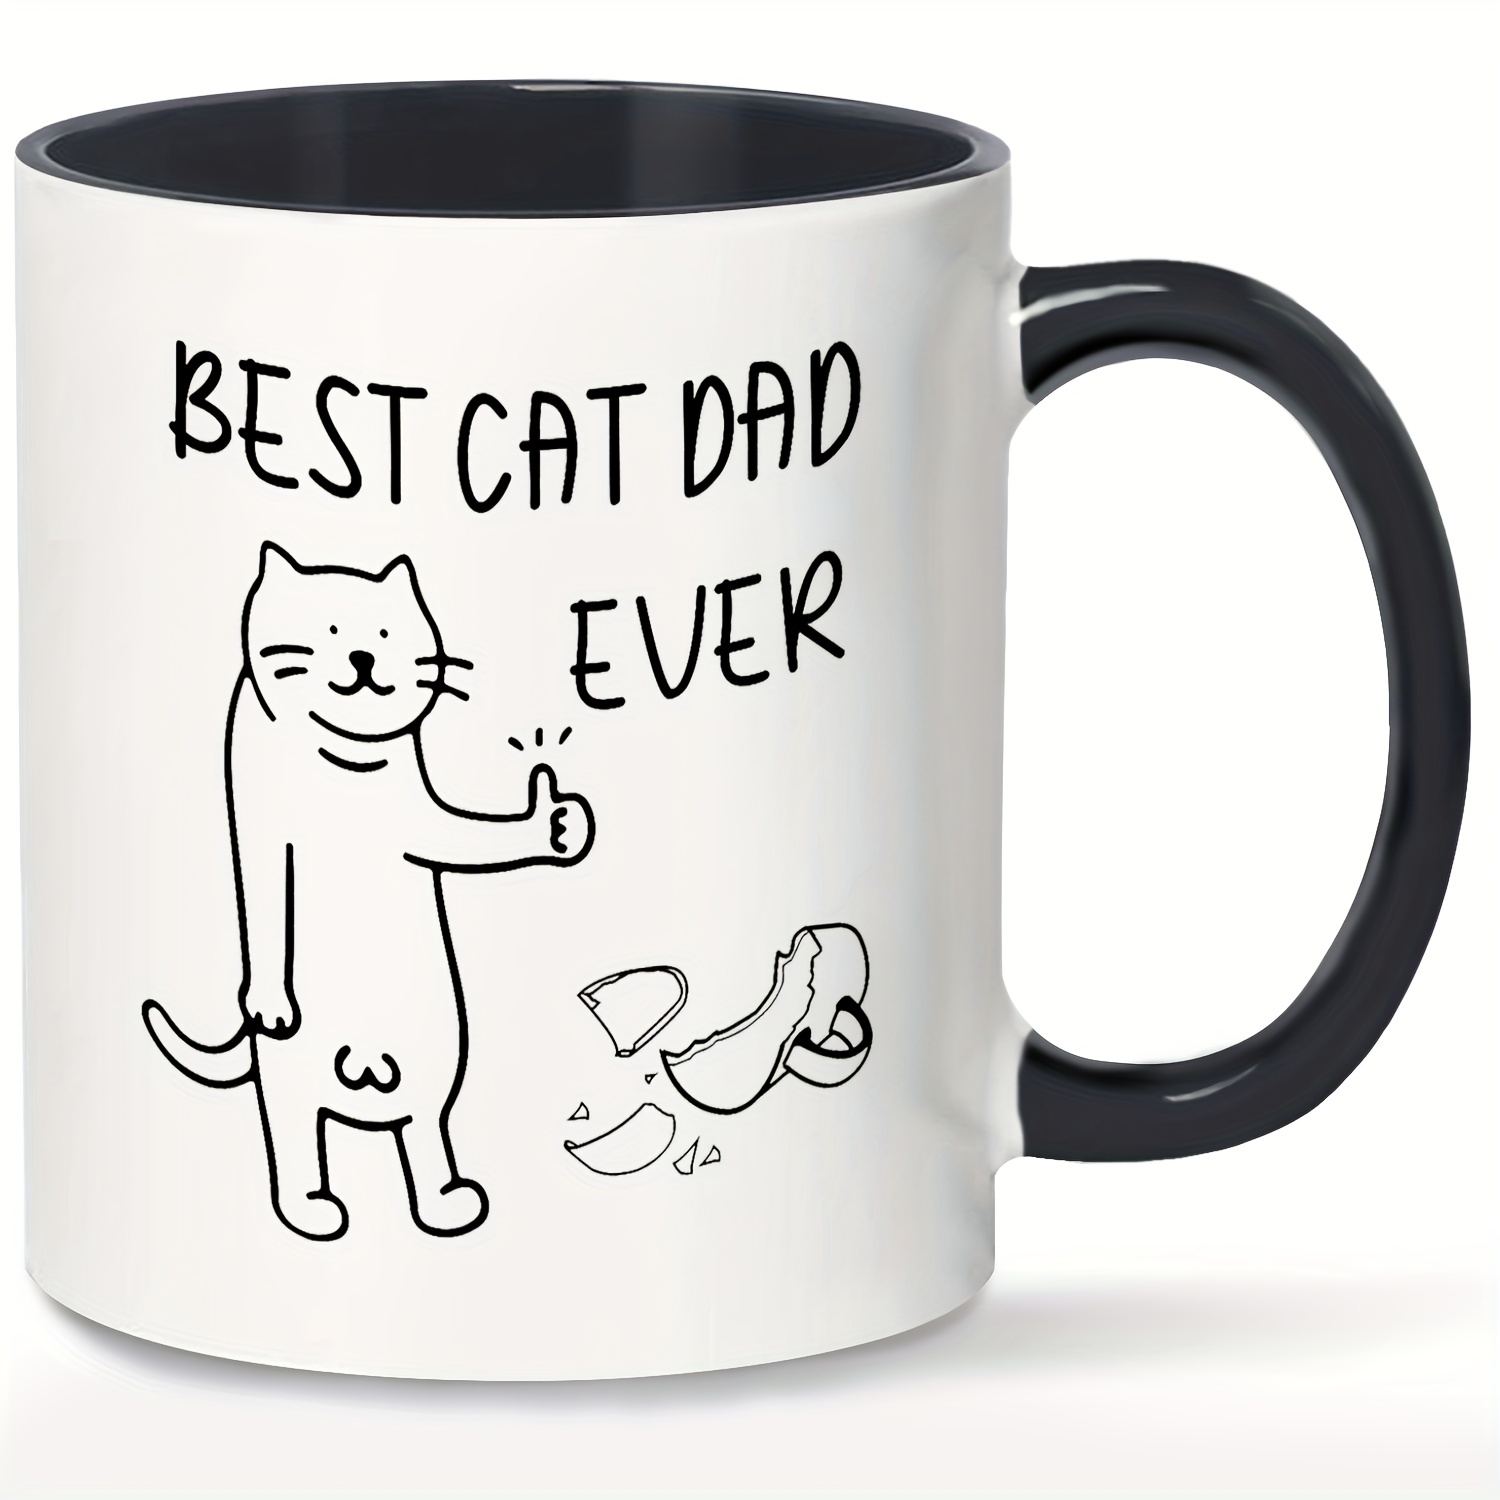 Dad, It's Amazing Funny Coffee Mug - Best Christmas Gifts for Dad, Men –  Wittsy Glassware